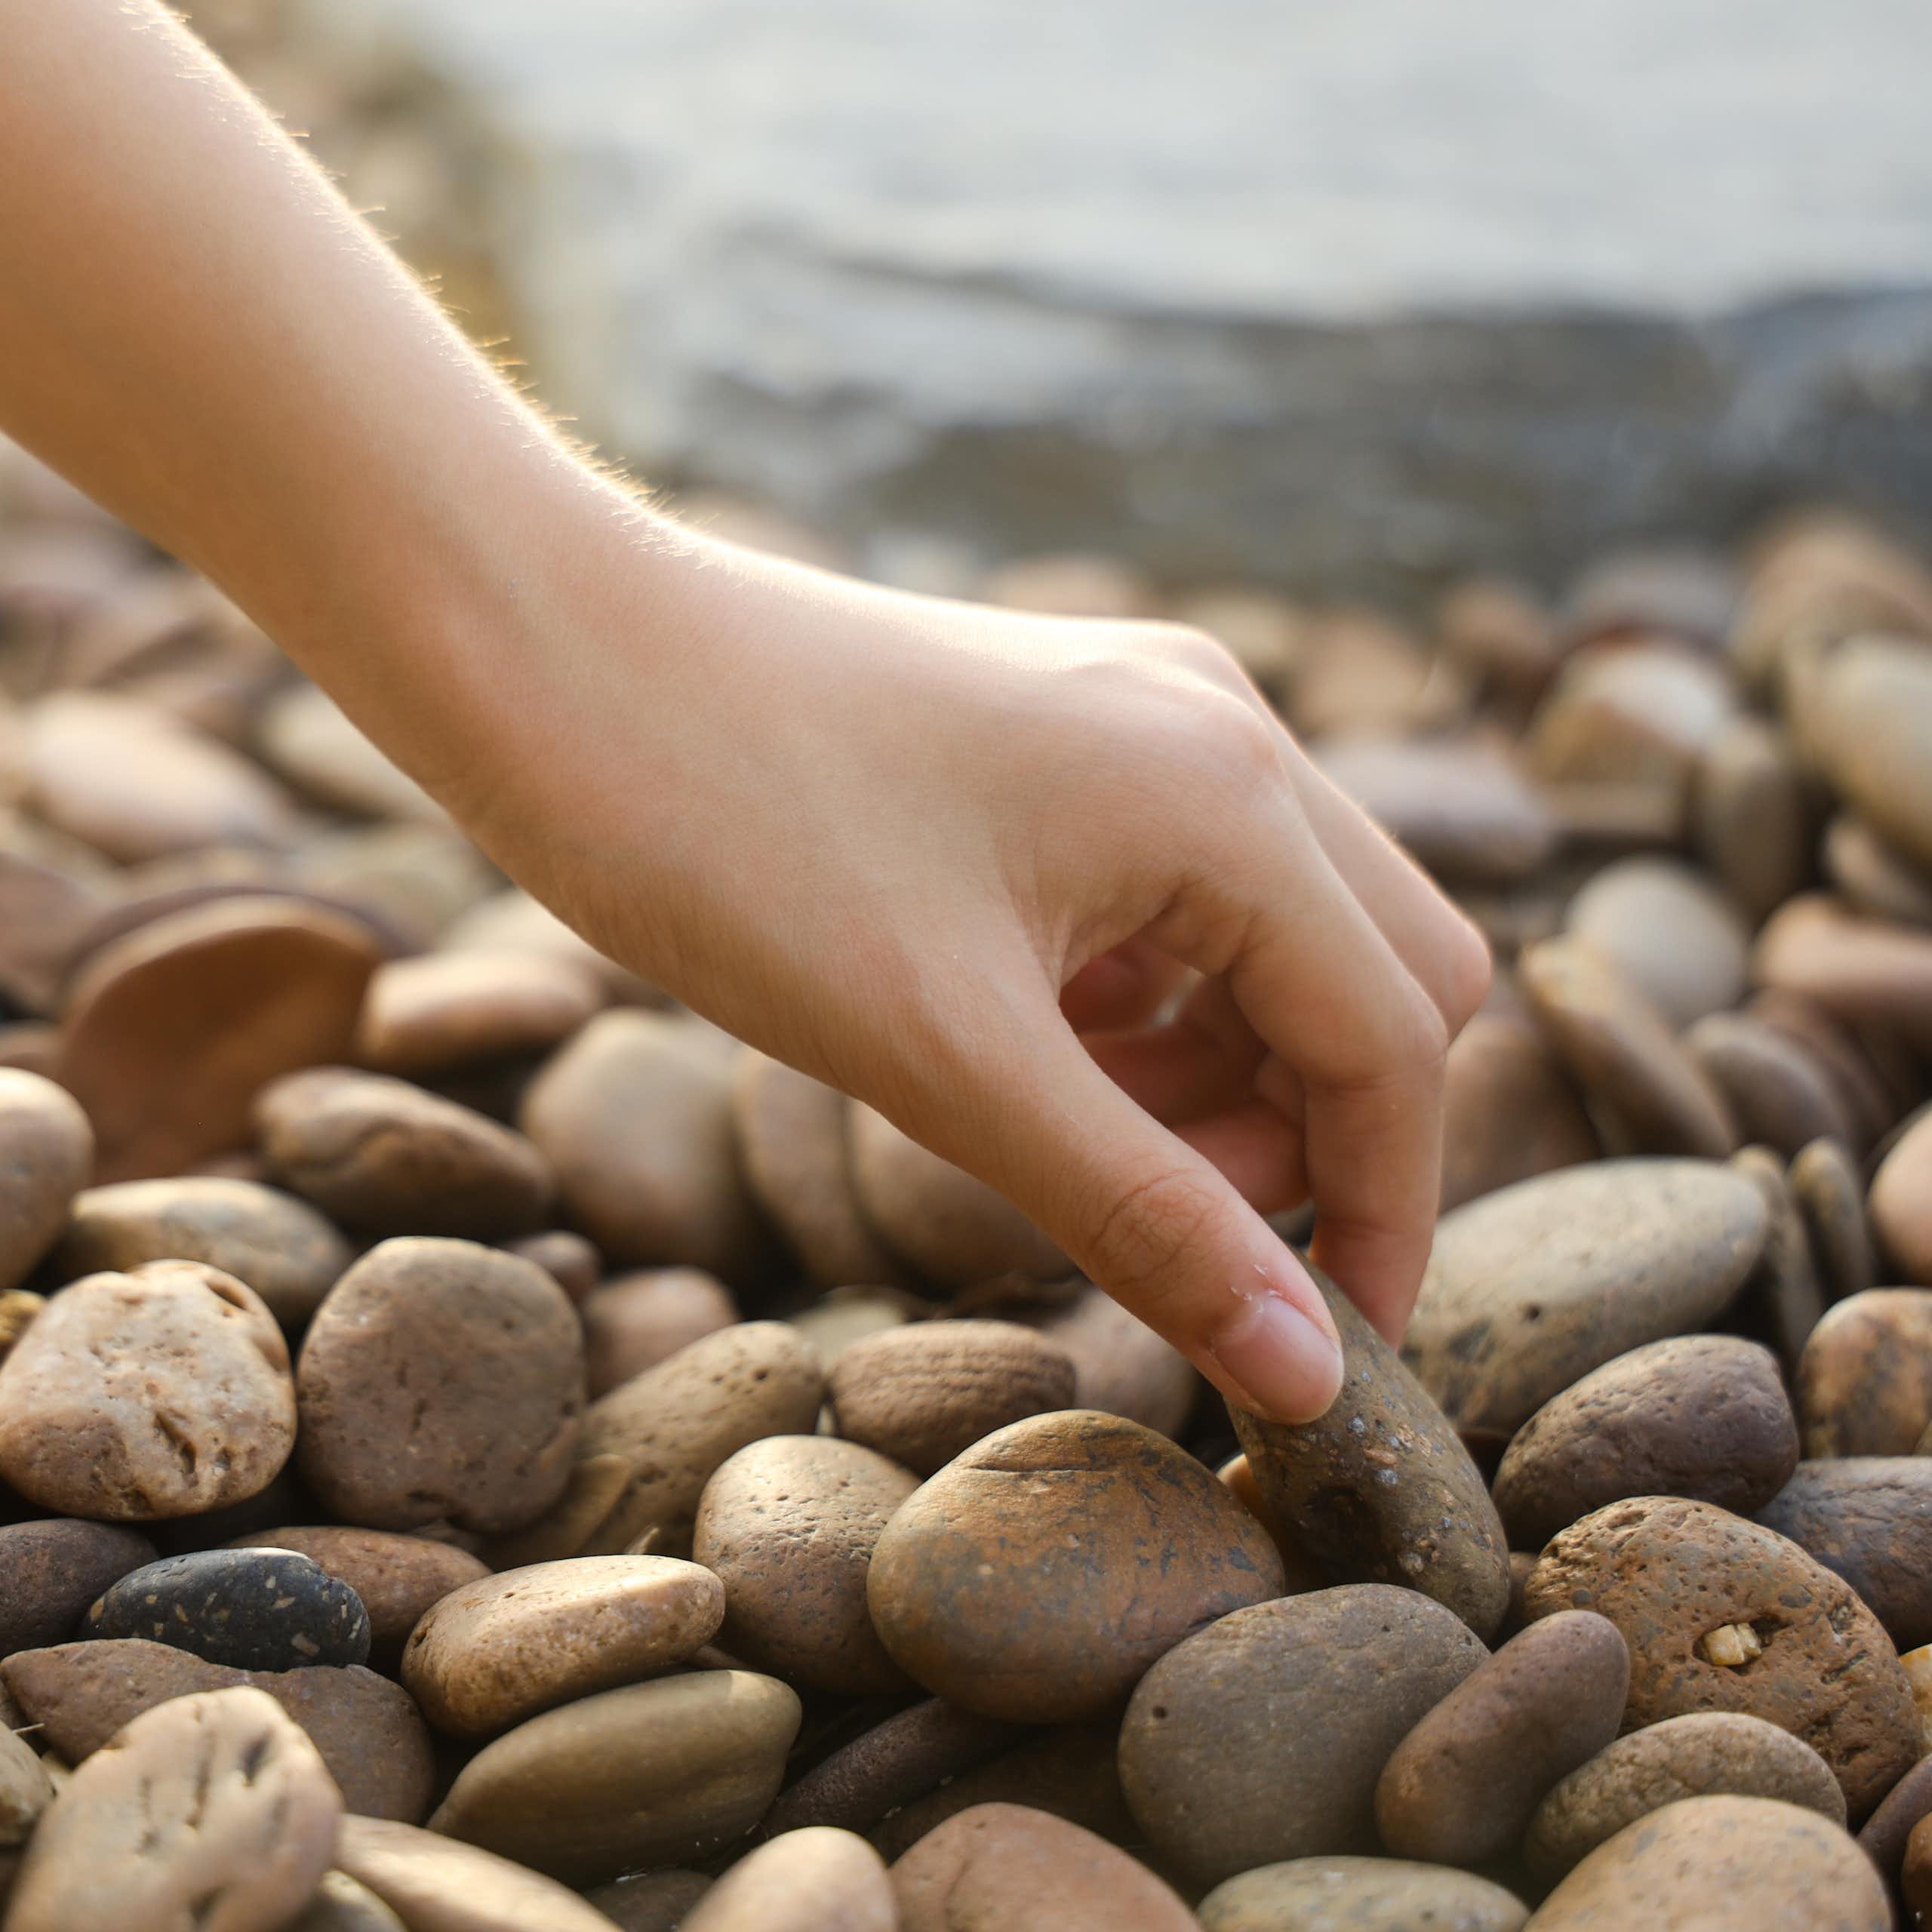 Why you shouldn’t take pebbles from the beach – here’s the science